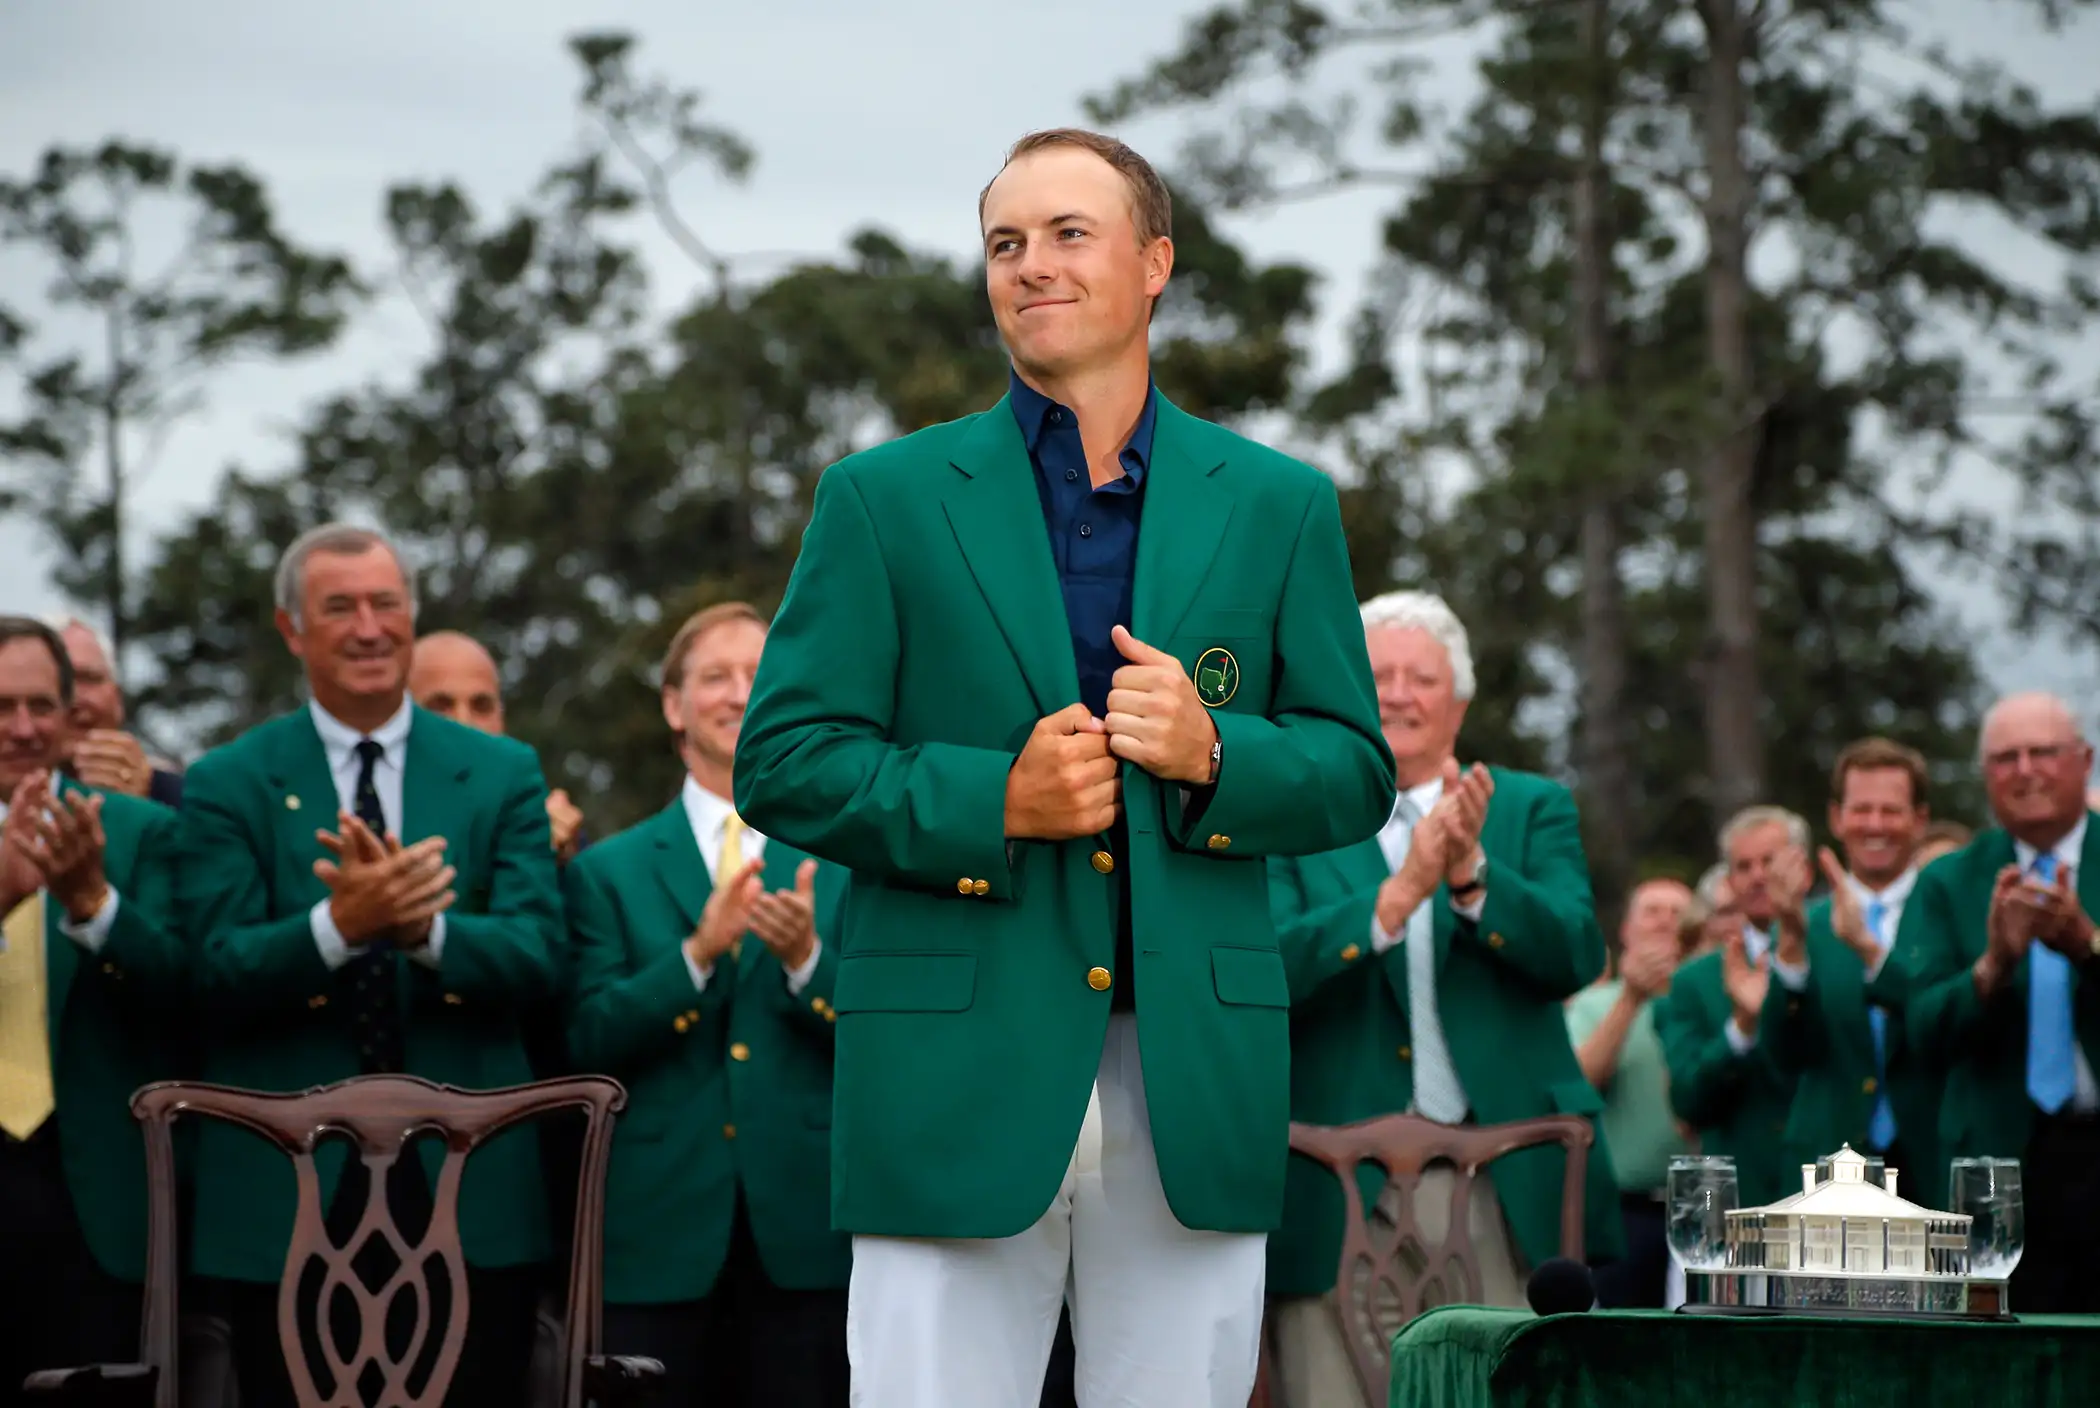 Jordan Spieth of the U.S. grins as he wears his Champion's green jacket on the putting green after winning the Masters golf tournament at the Augusta National Golf Course in Augusta, Georgia April 12, 2015.